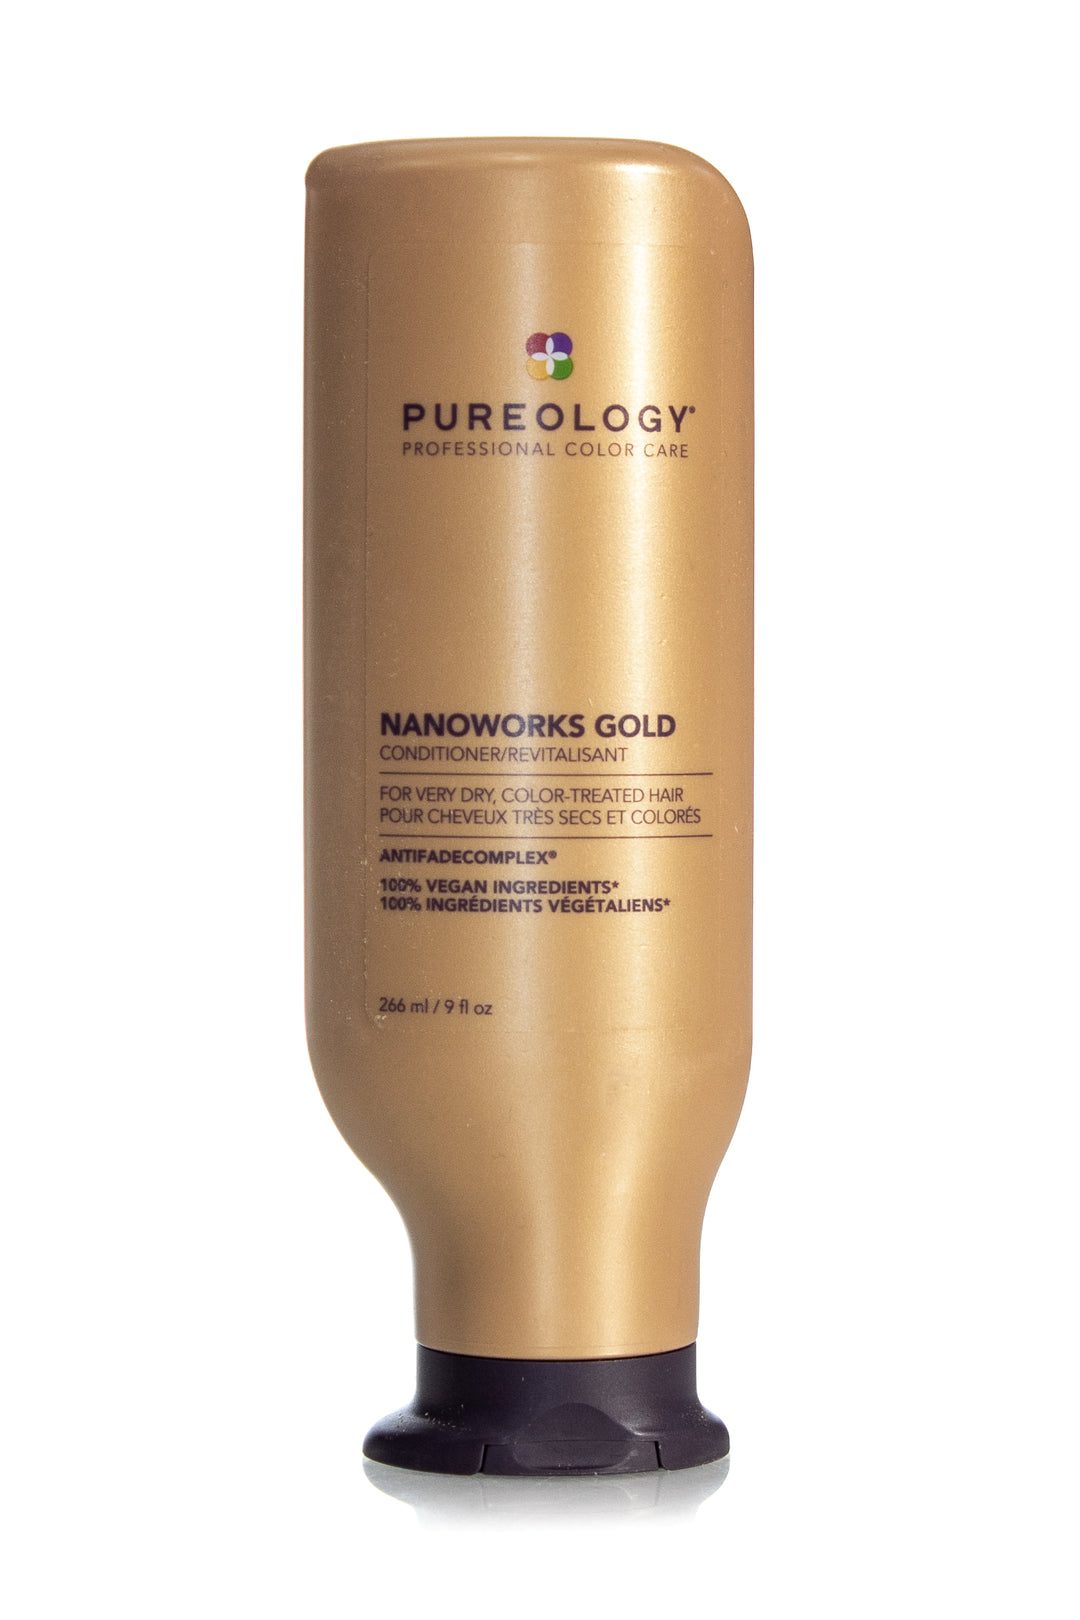 PUREOLOGY Nanoworks Gold Conditioner | 266ml